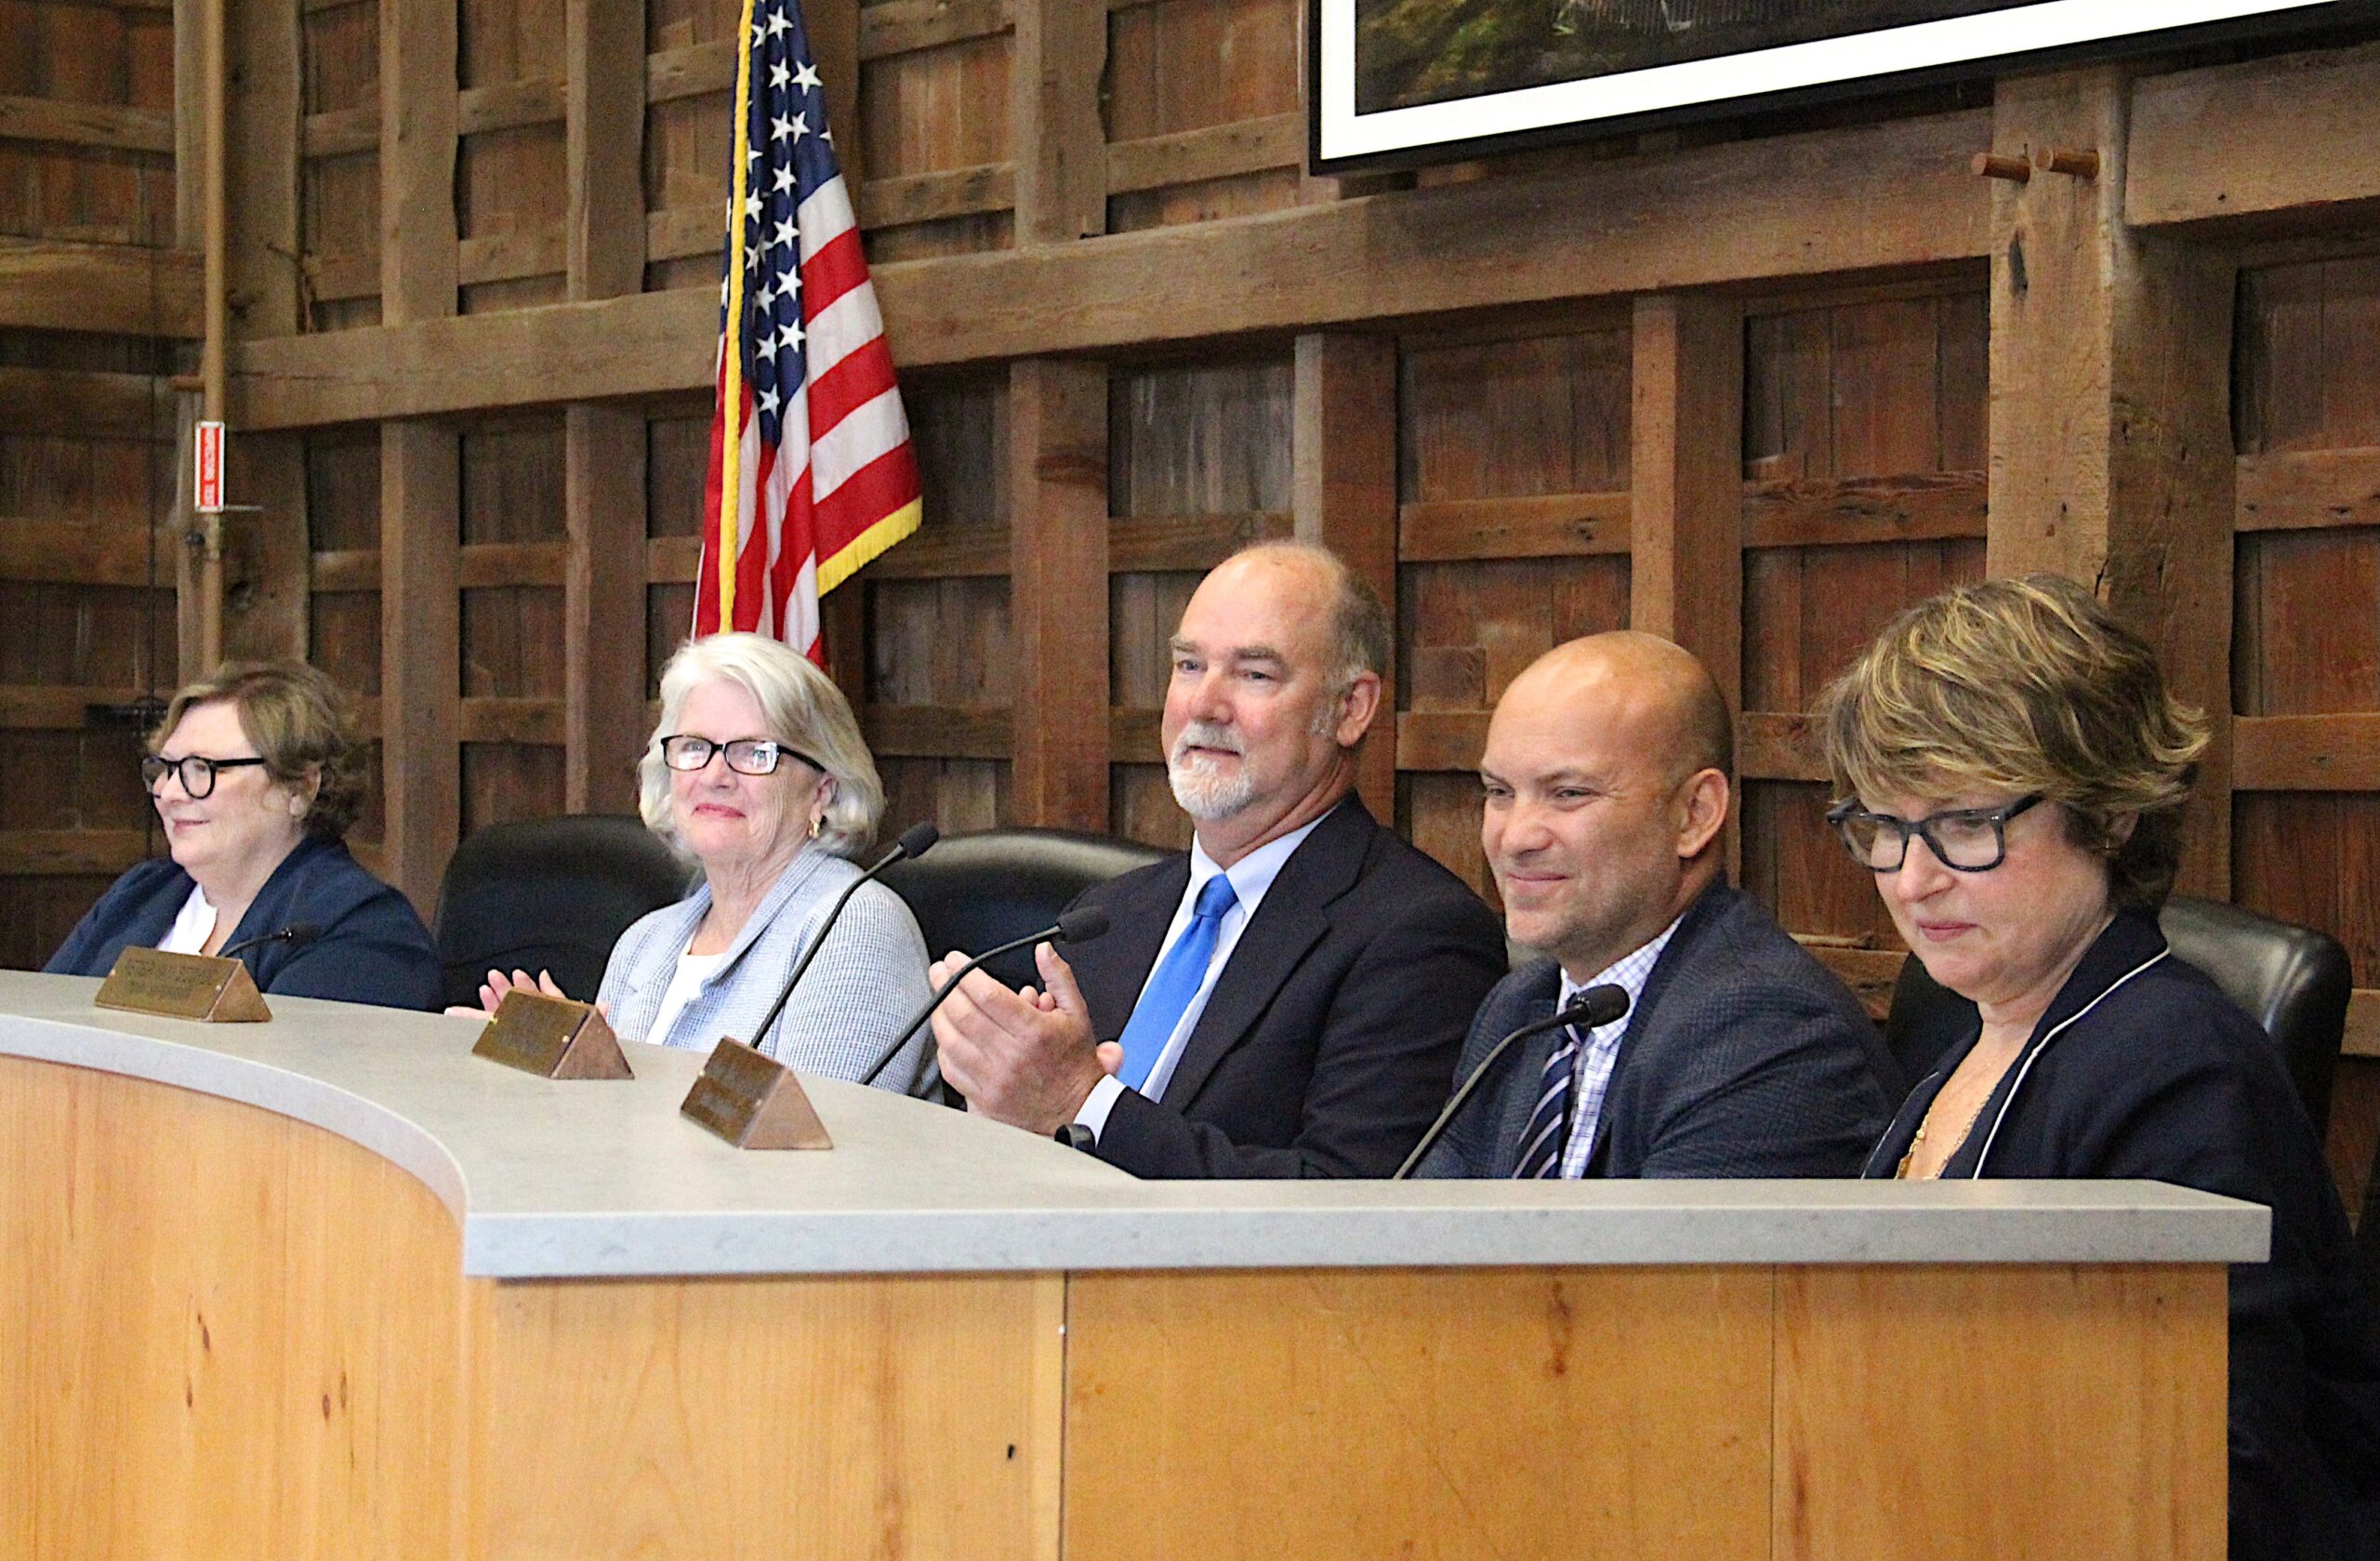 The East Hampton Town Board unanimously approved a ballot measure to put its new Community Housing Fund on the November ballot for voter approval.